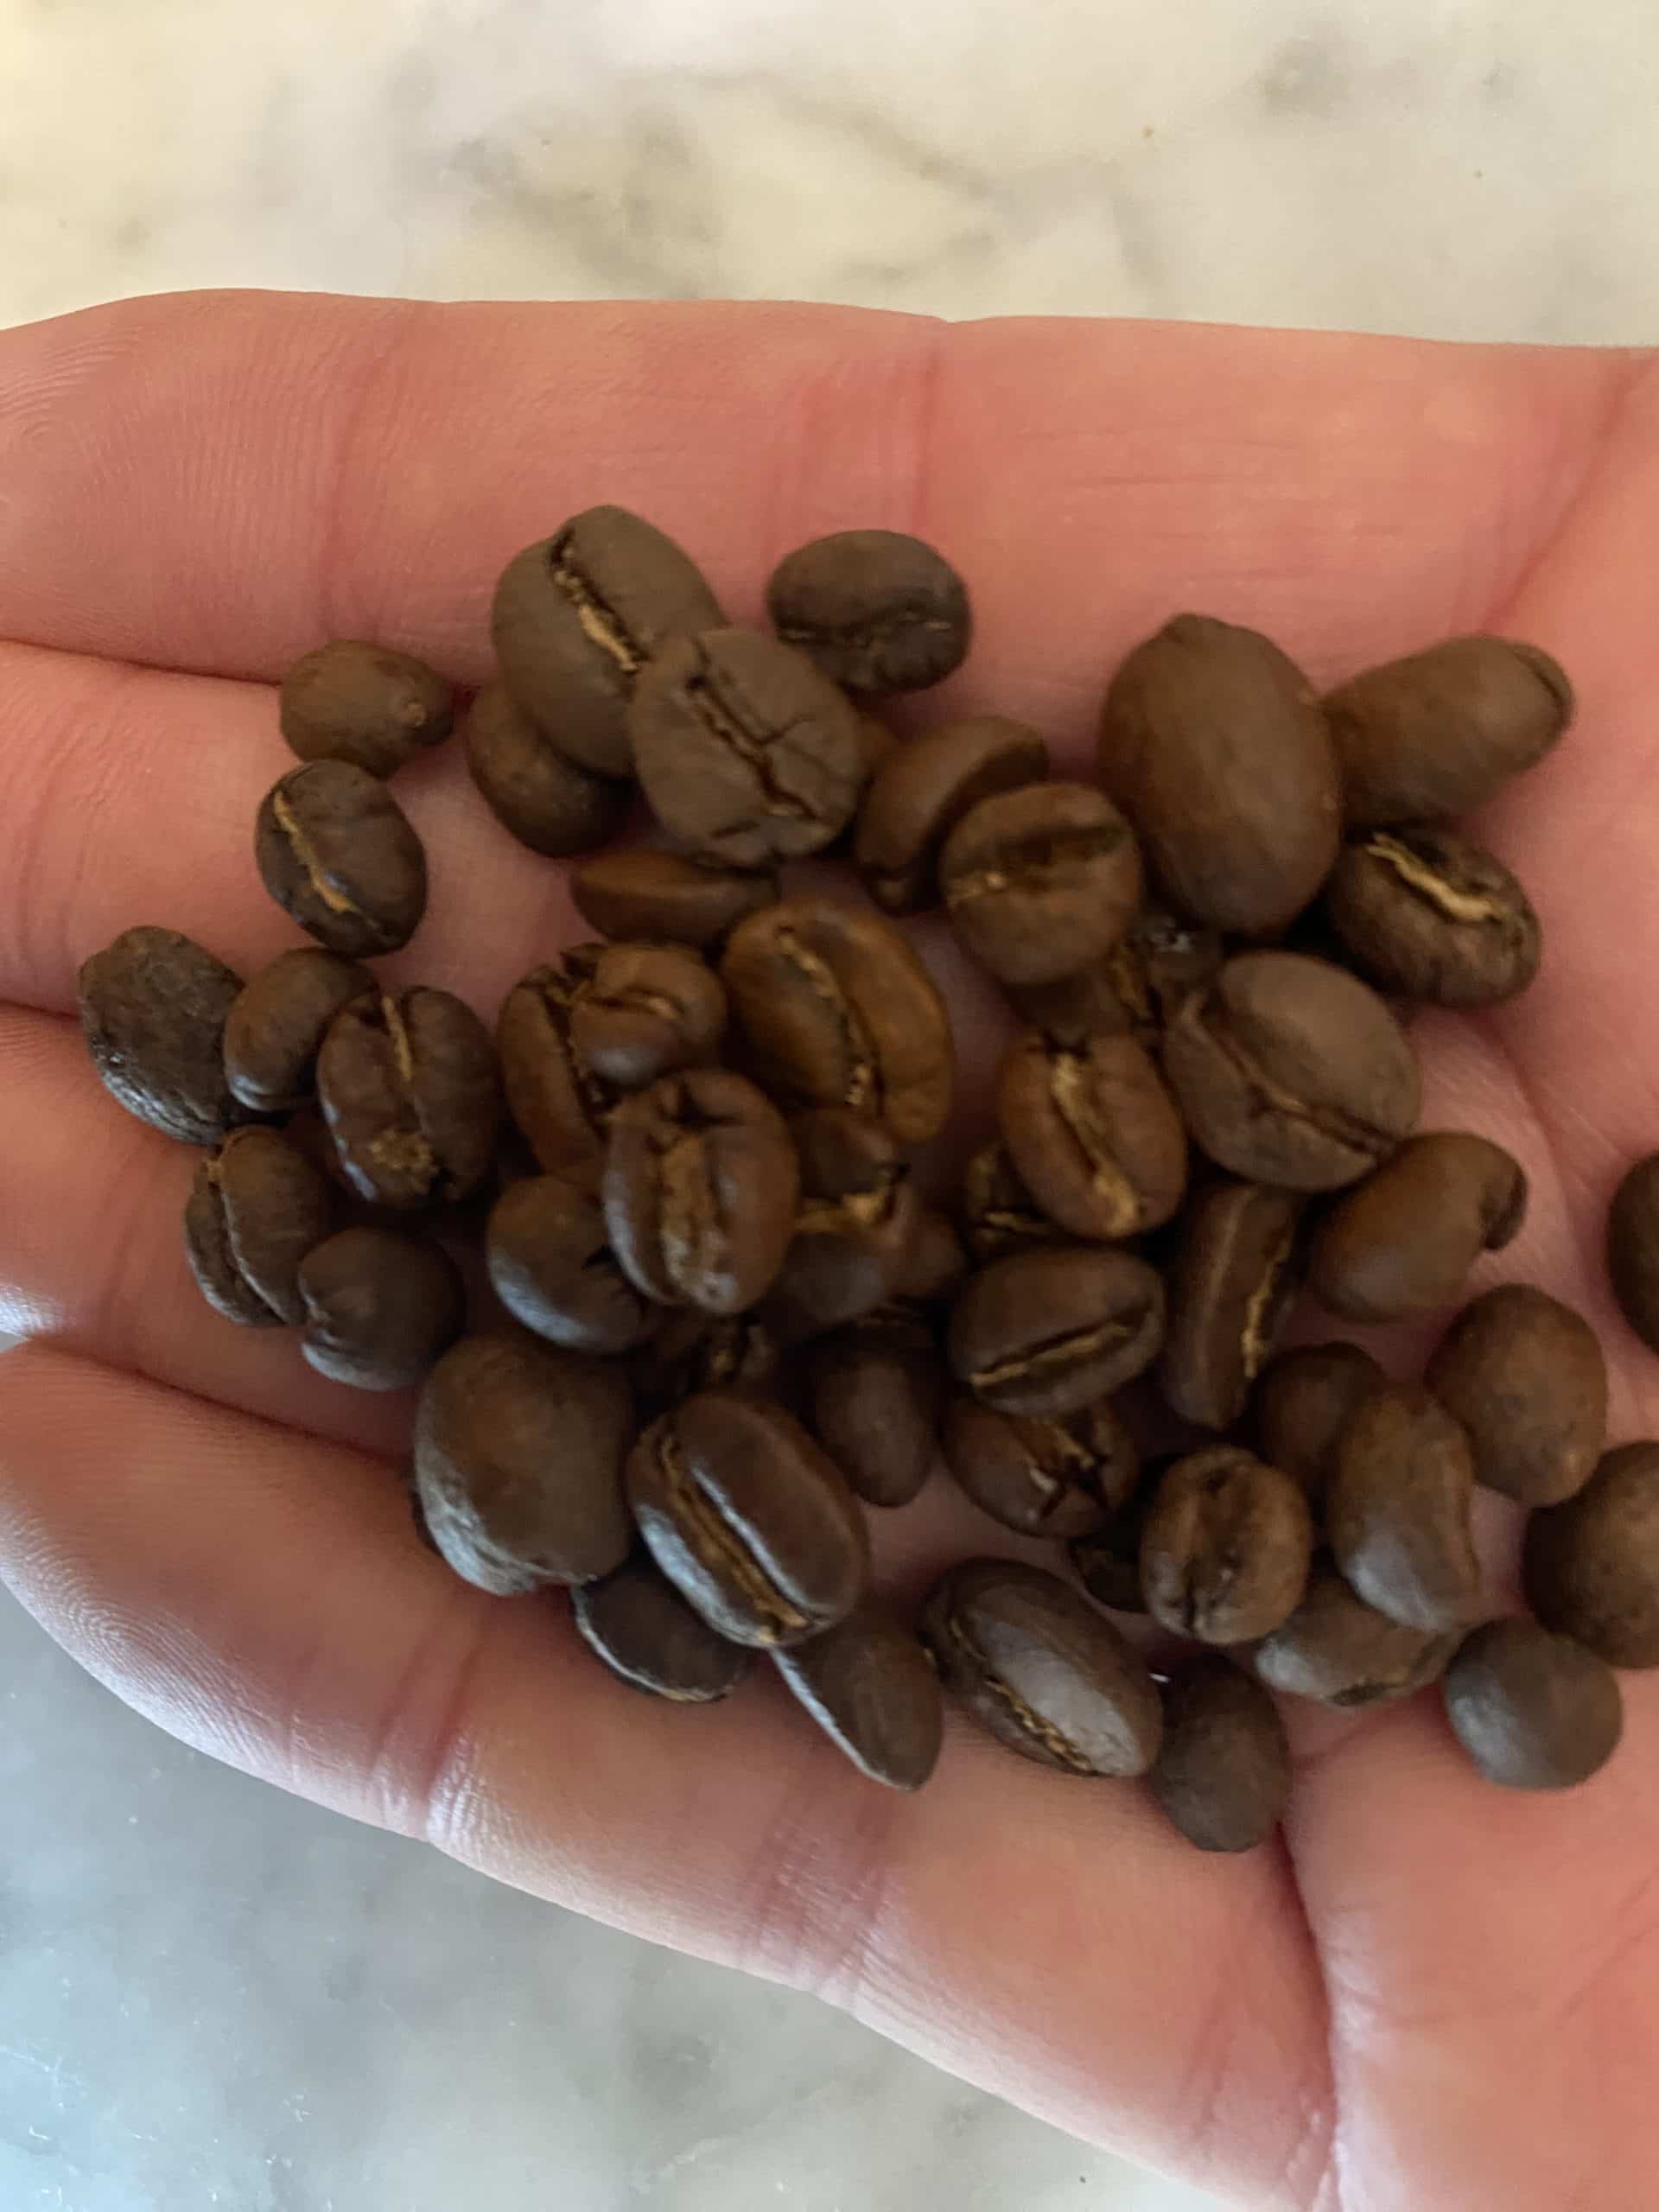 Archipelago Coffee's Rindo Blend coffee beans in palm of hand.